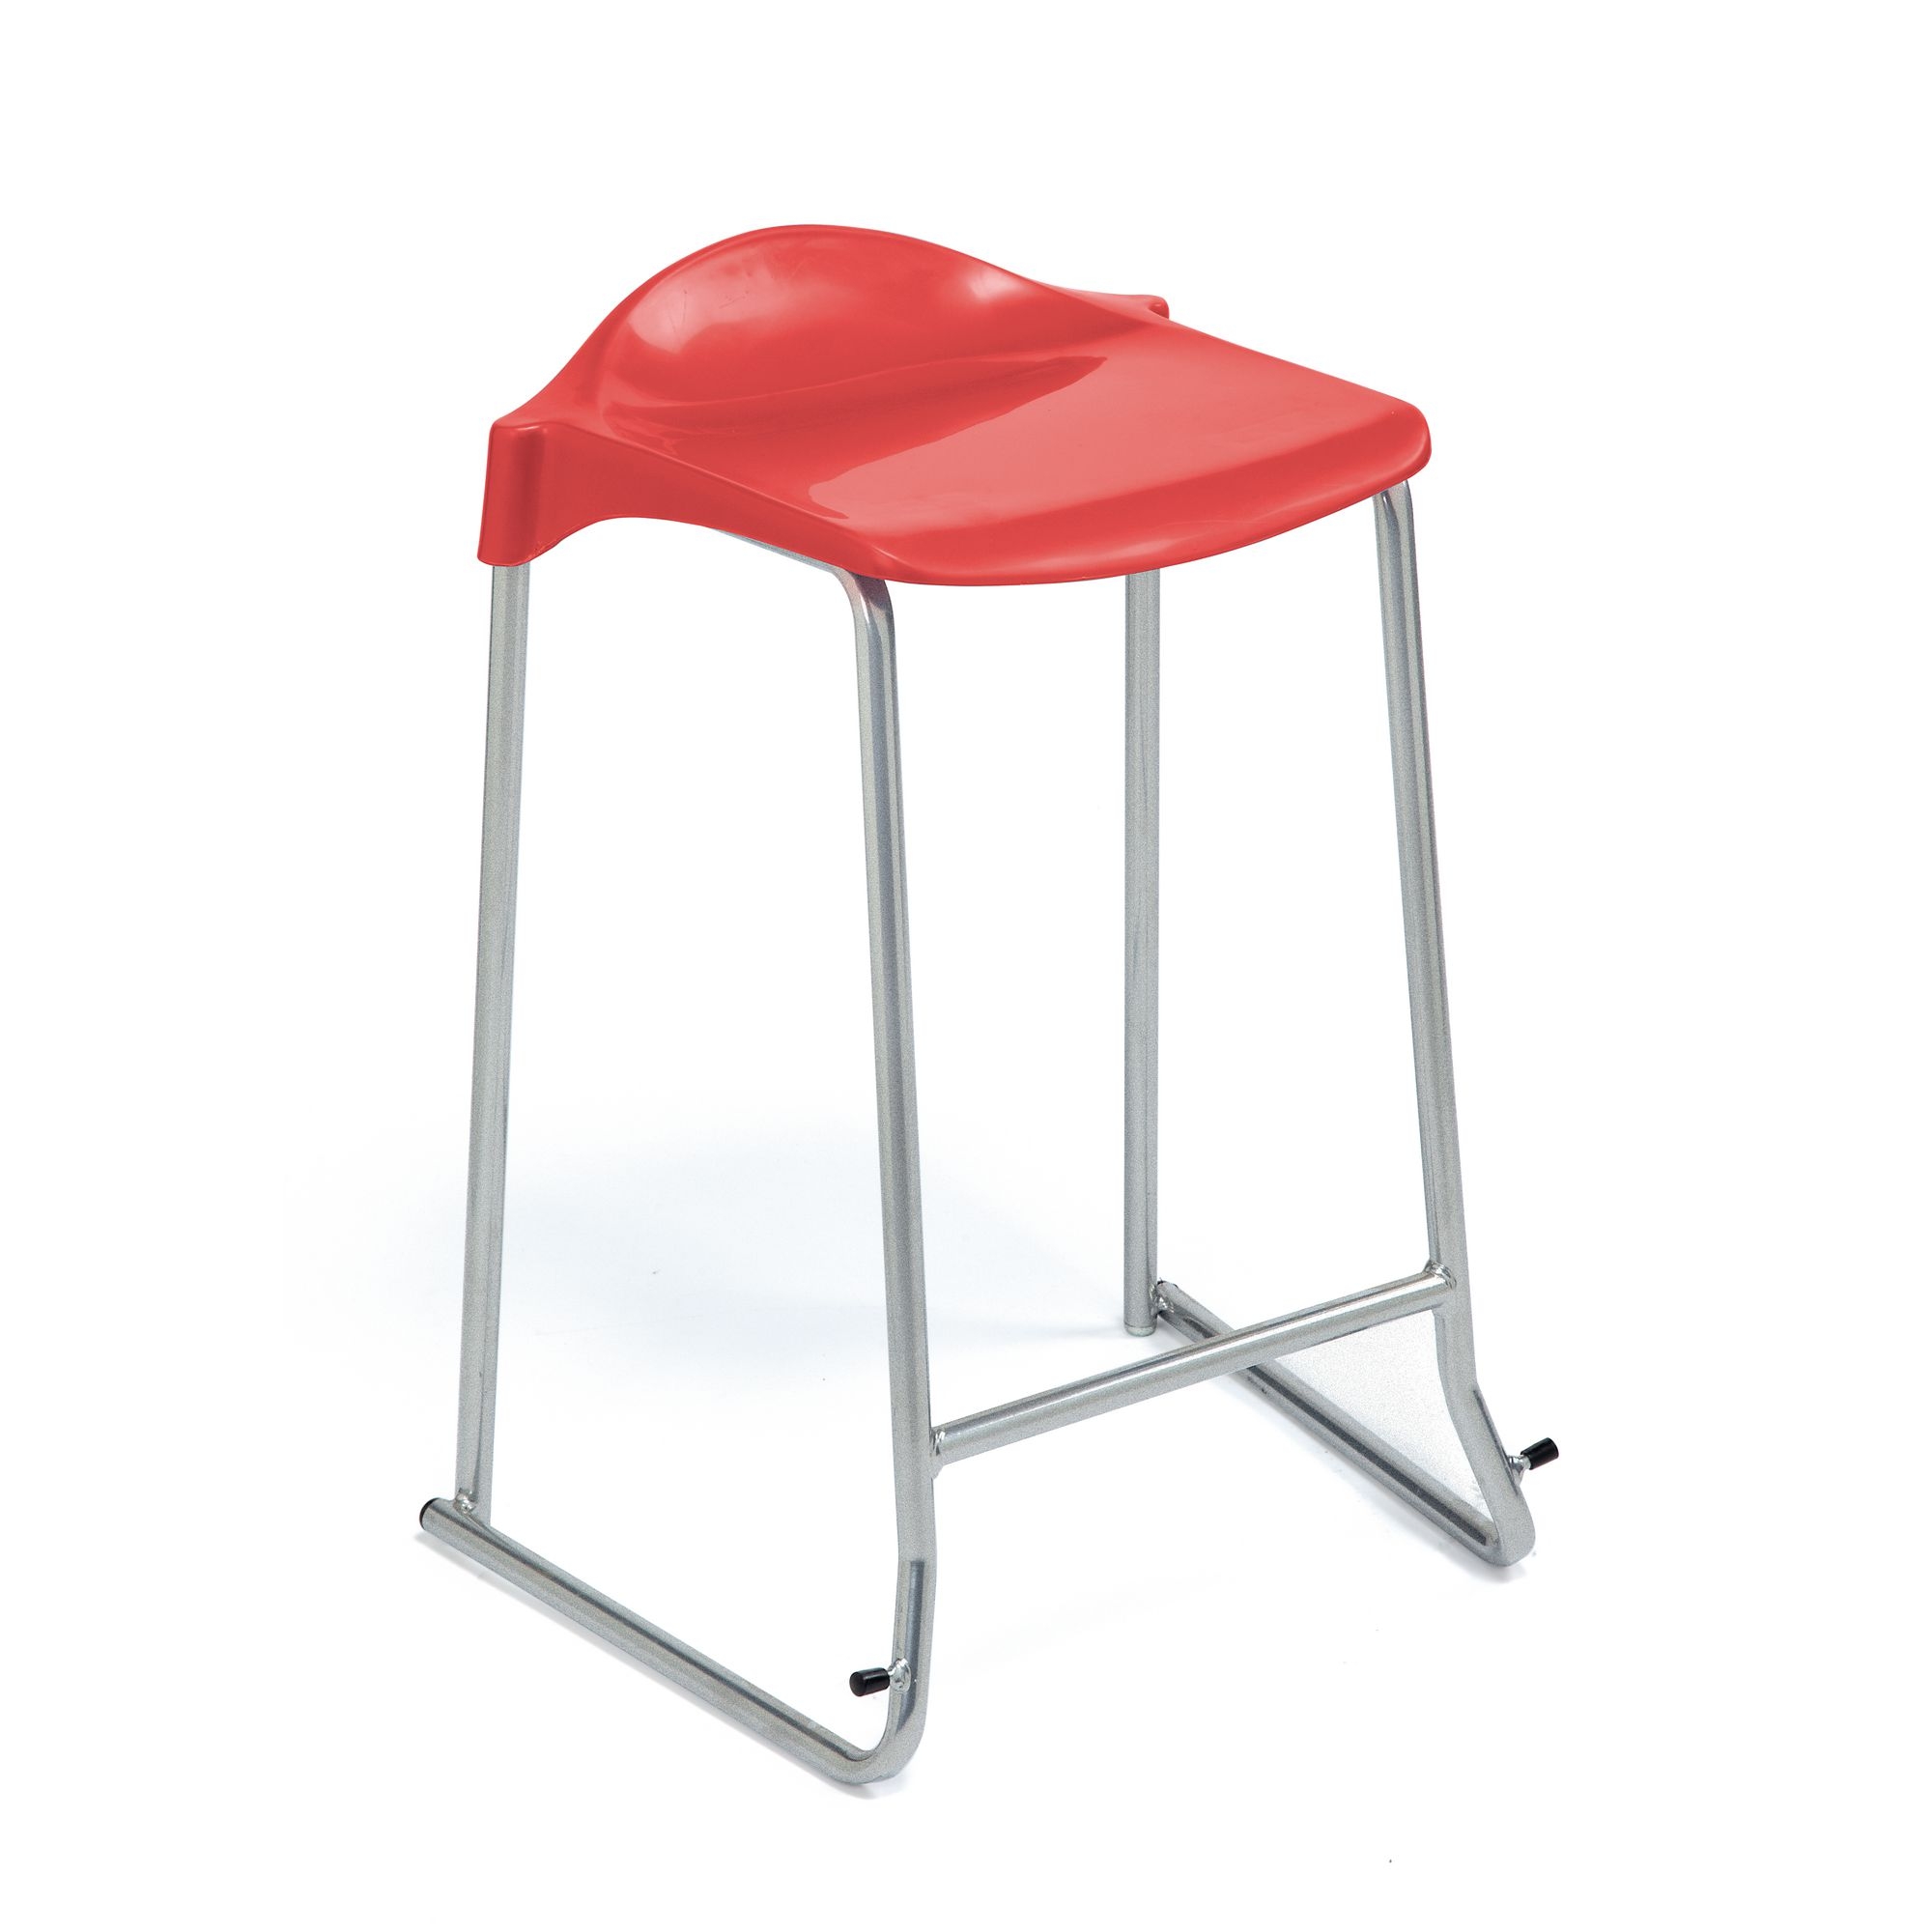 WSM Skid Base Stool - Seat height: 610mm - Lime